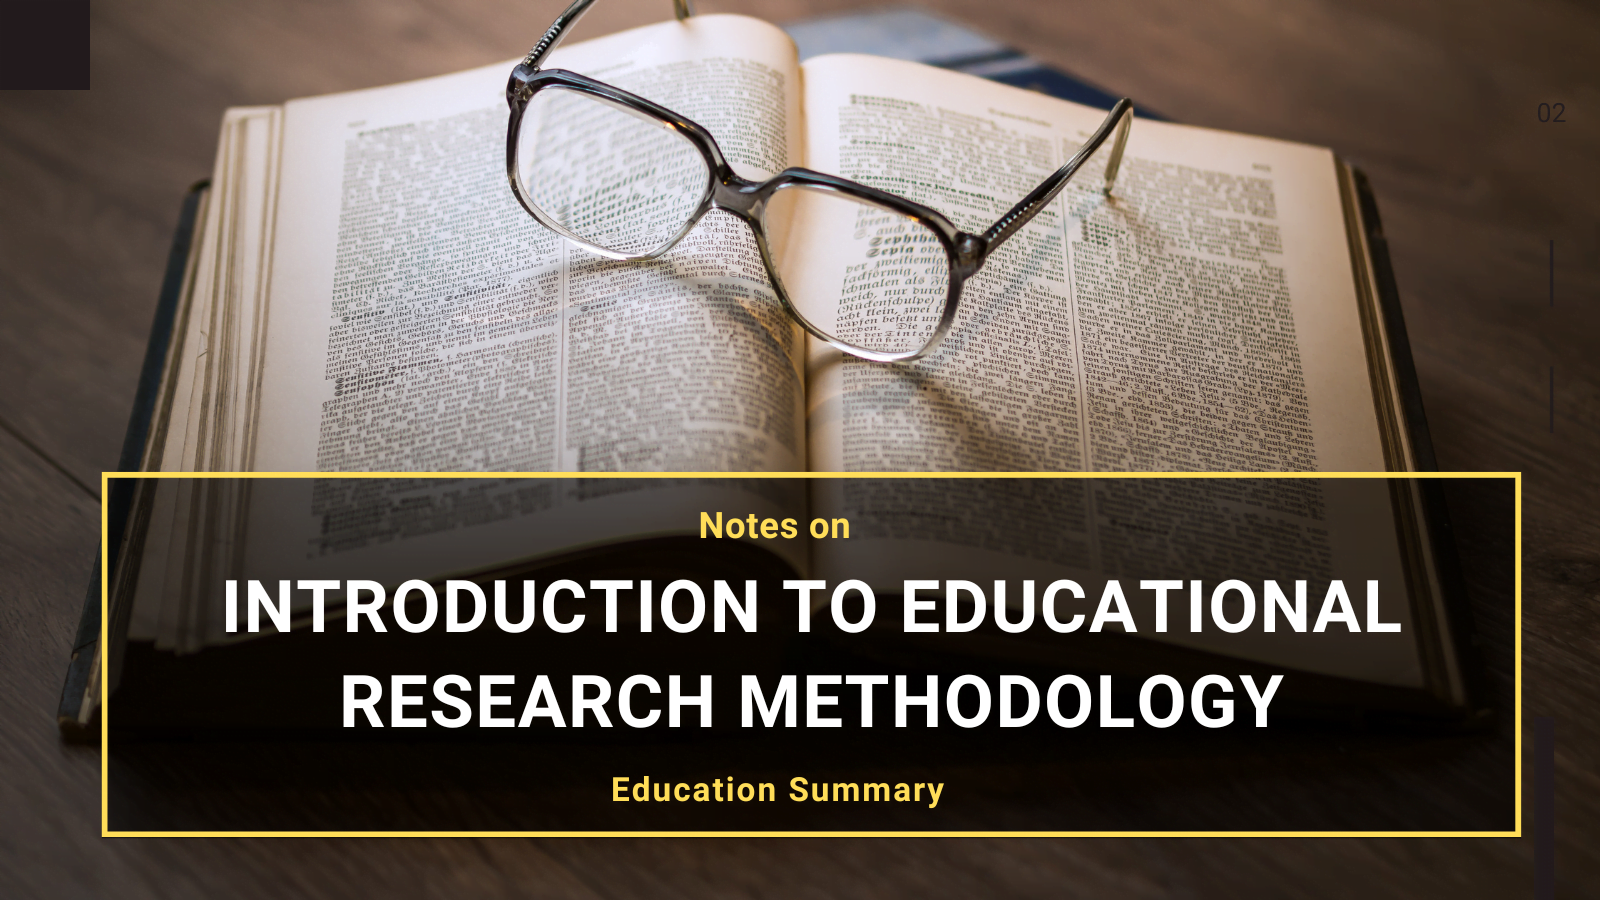 Introduction to Educational Research Methodology